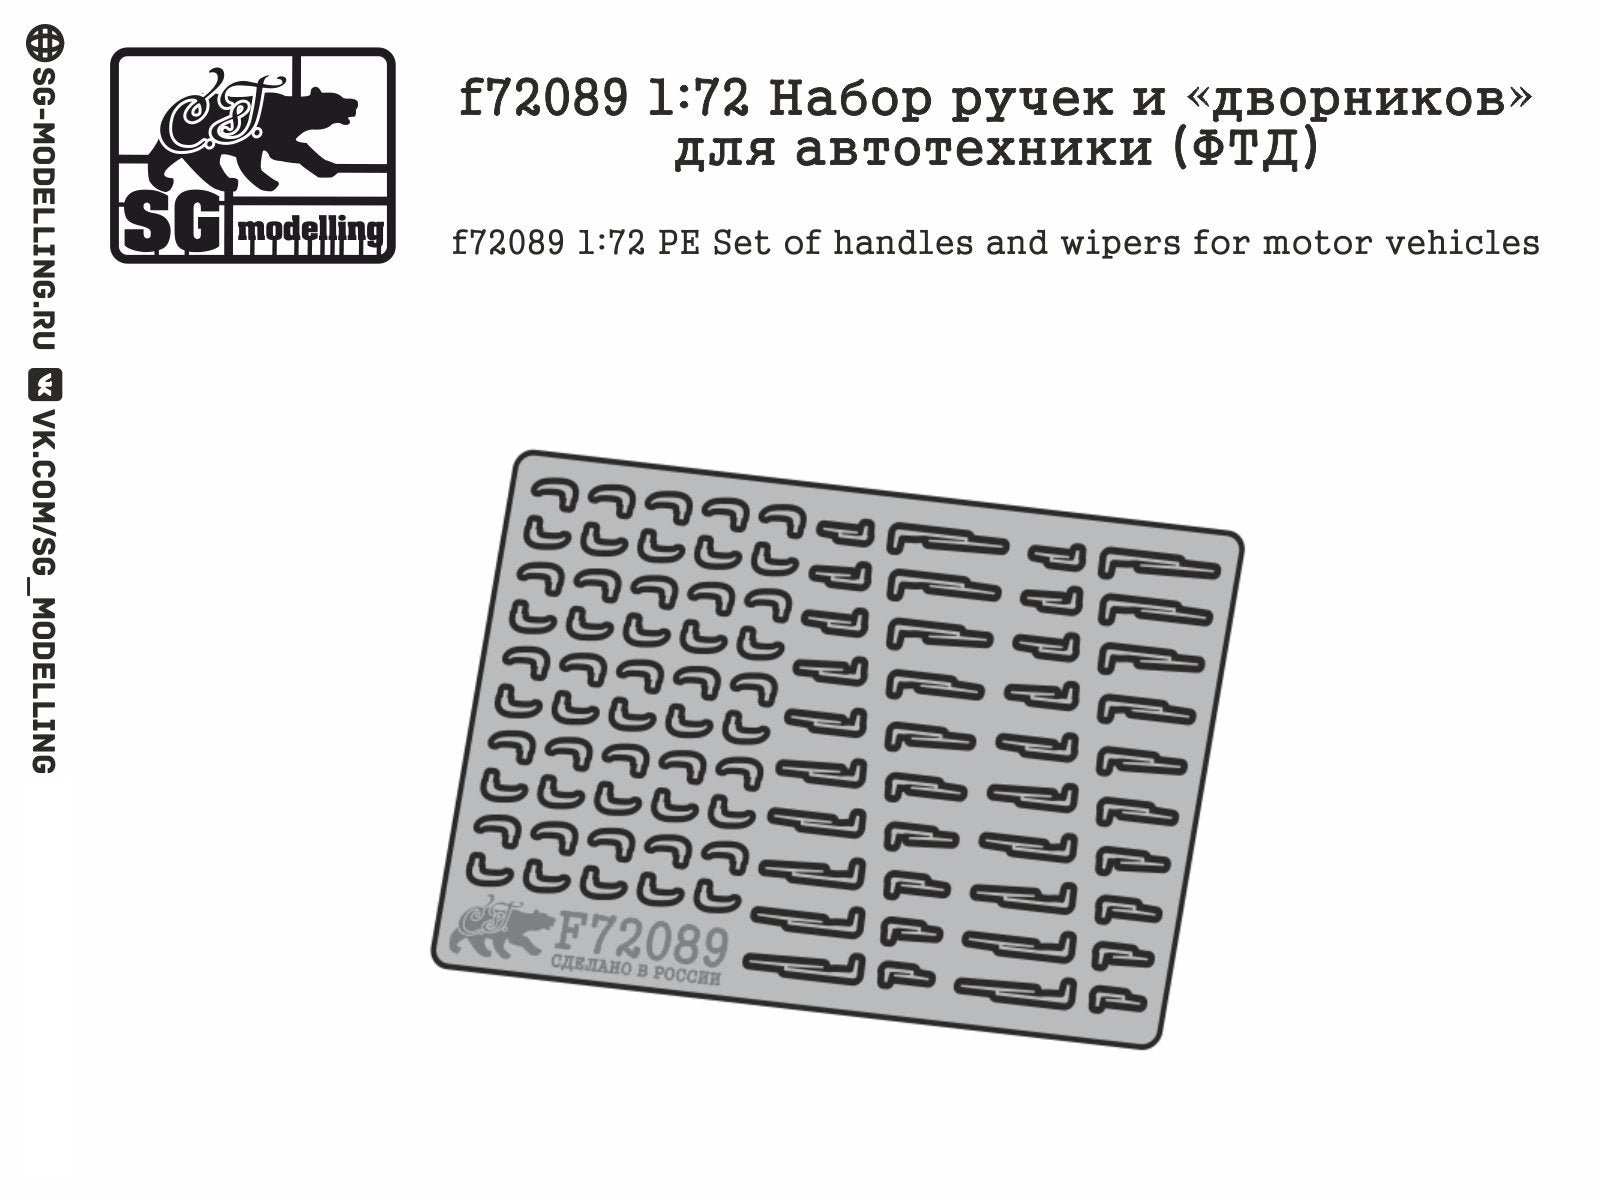 F72089 1:72 A set of pens and "wipers" for vehicles (FTD) - imodeller.store